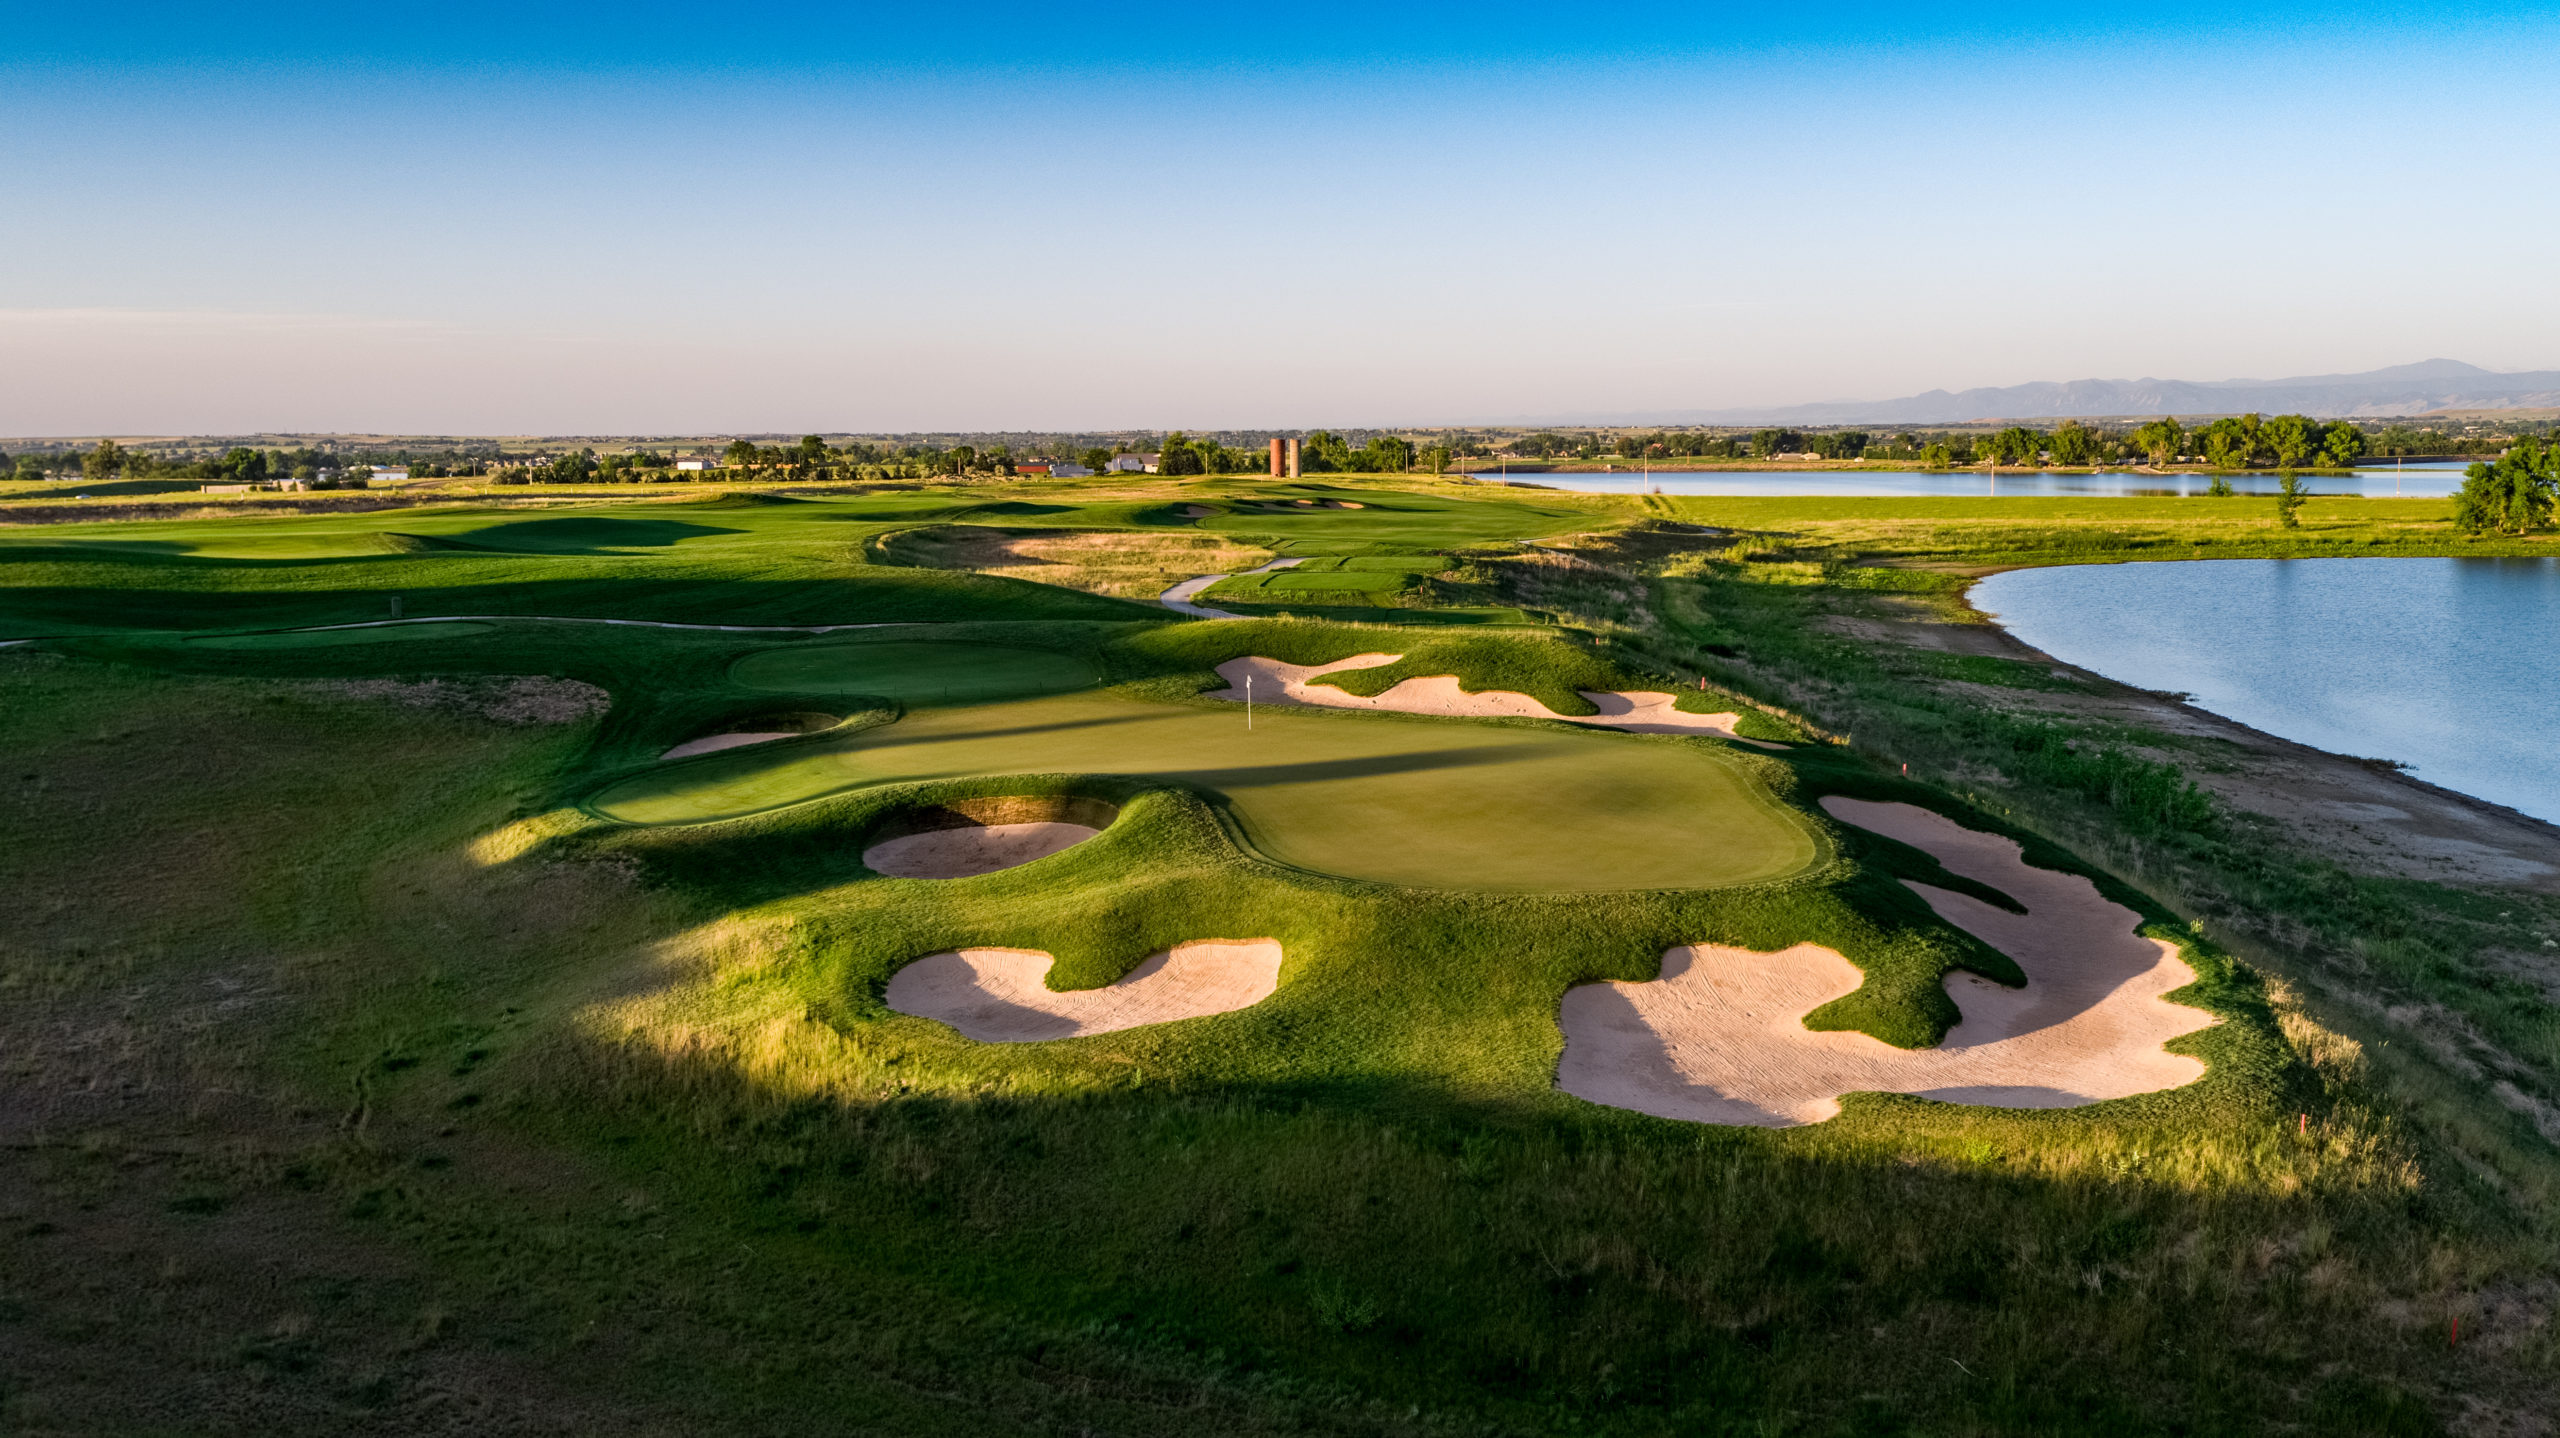 Colorado's only PGA TOUR-managed course offers a challenging layout with multiple tee options (source: Heron Lakes at TPC Colorado).